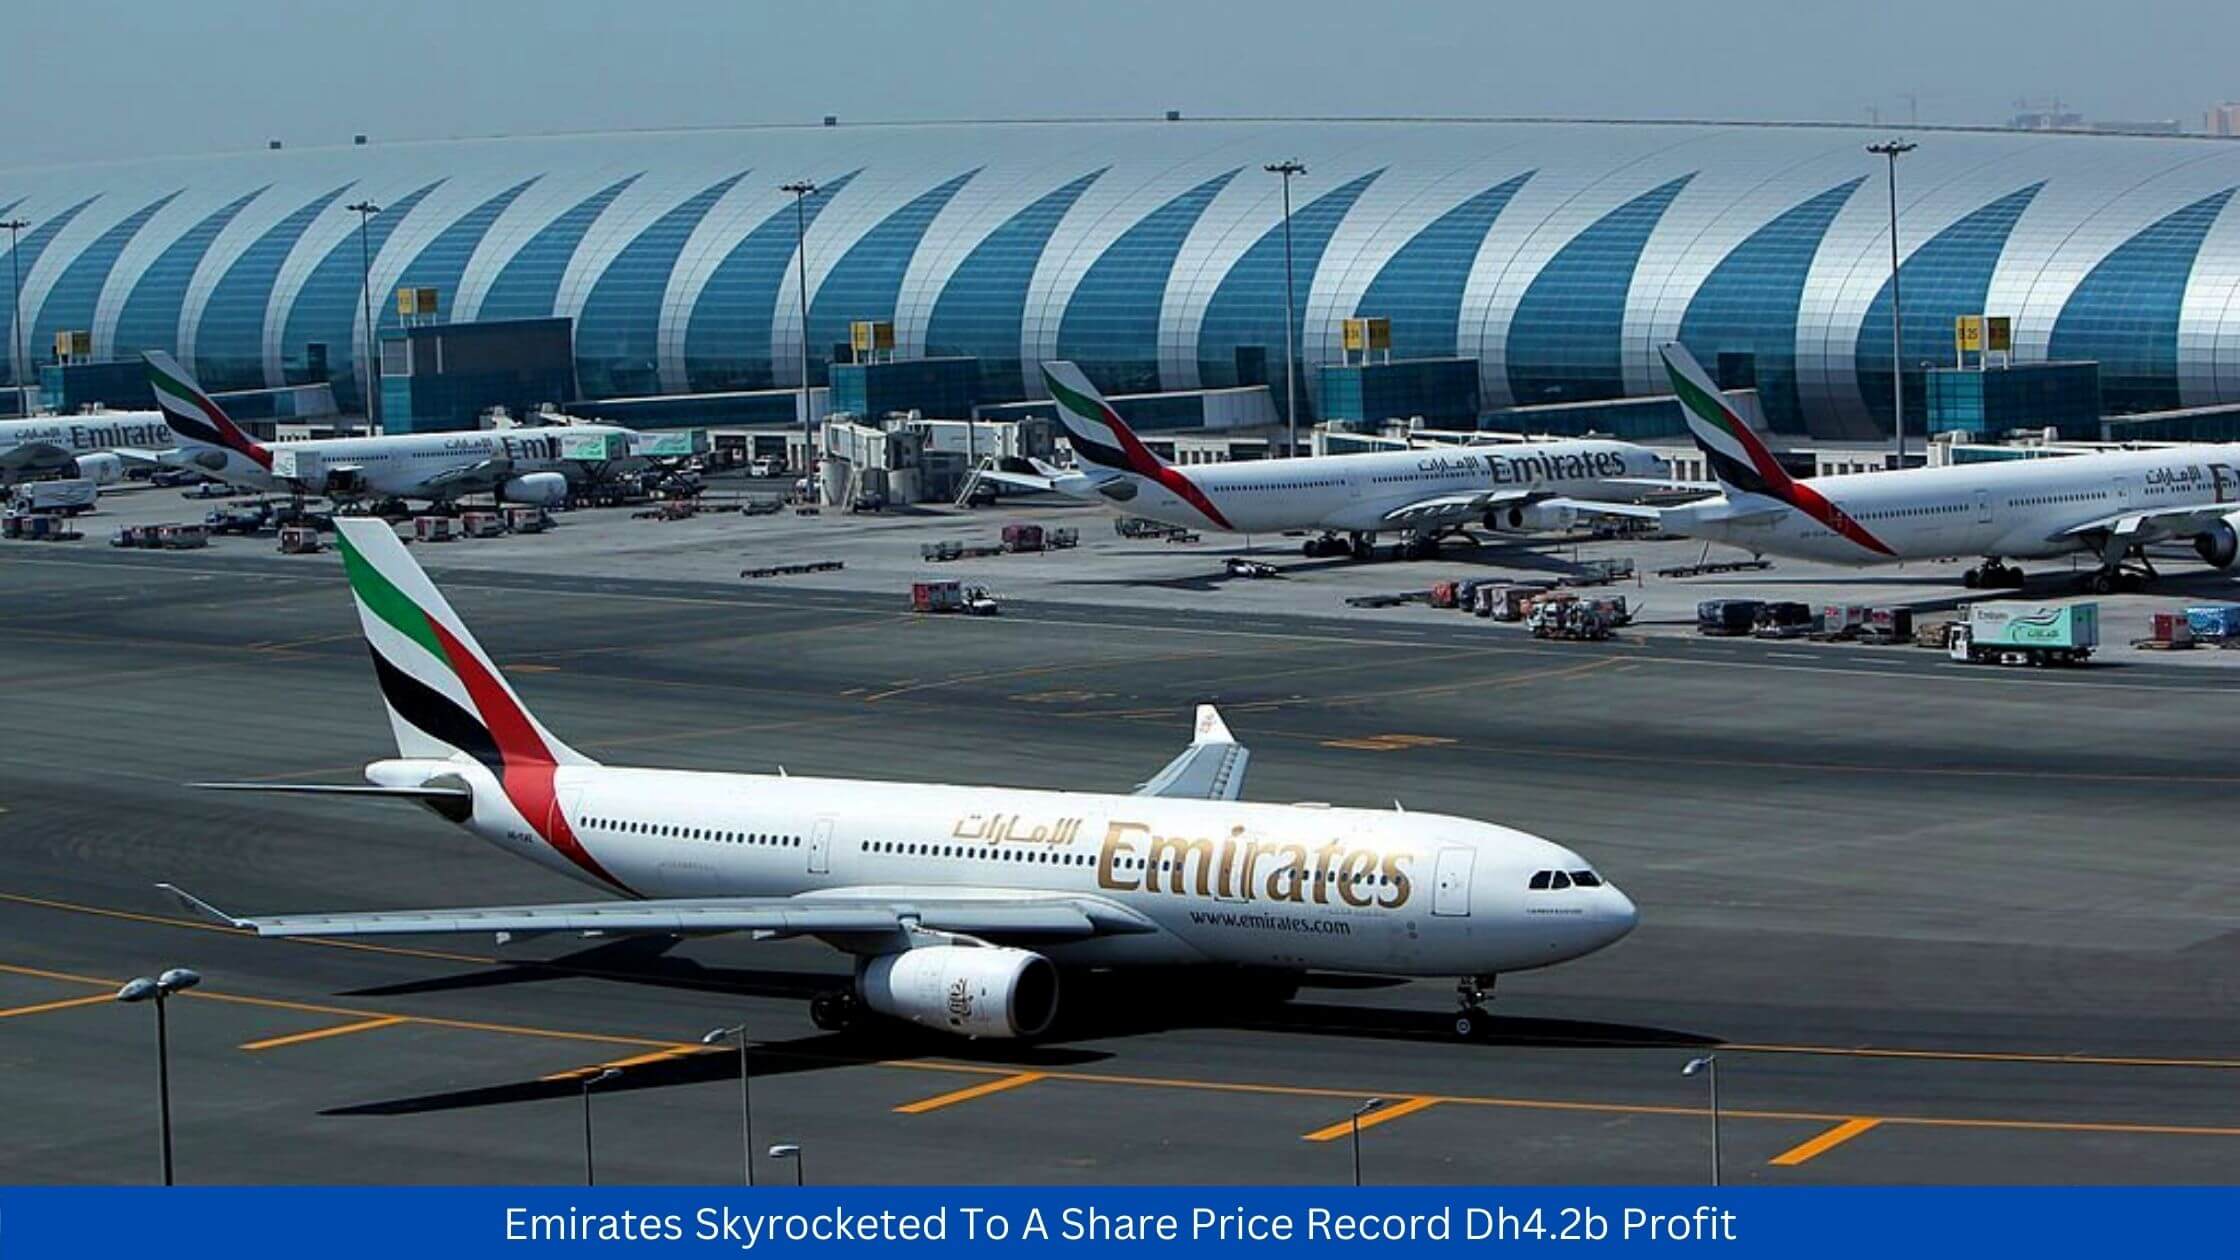 Emirates Skyrocketed To A Share Price Record Dh4.2b Profit